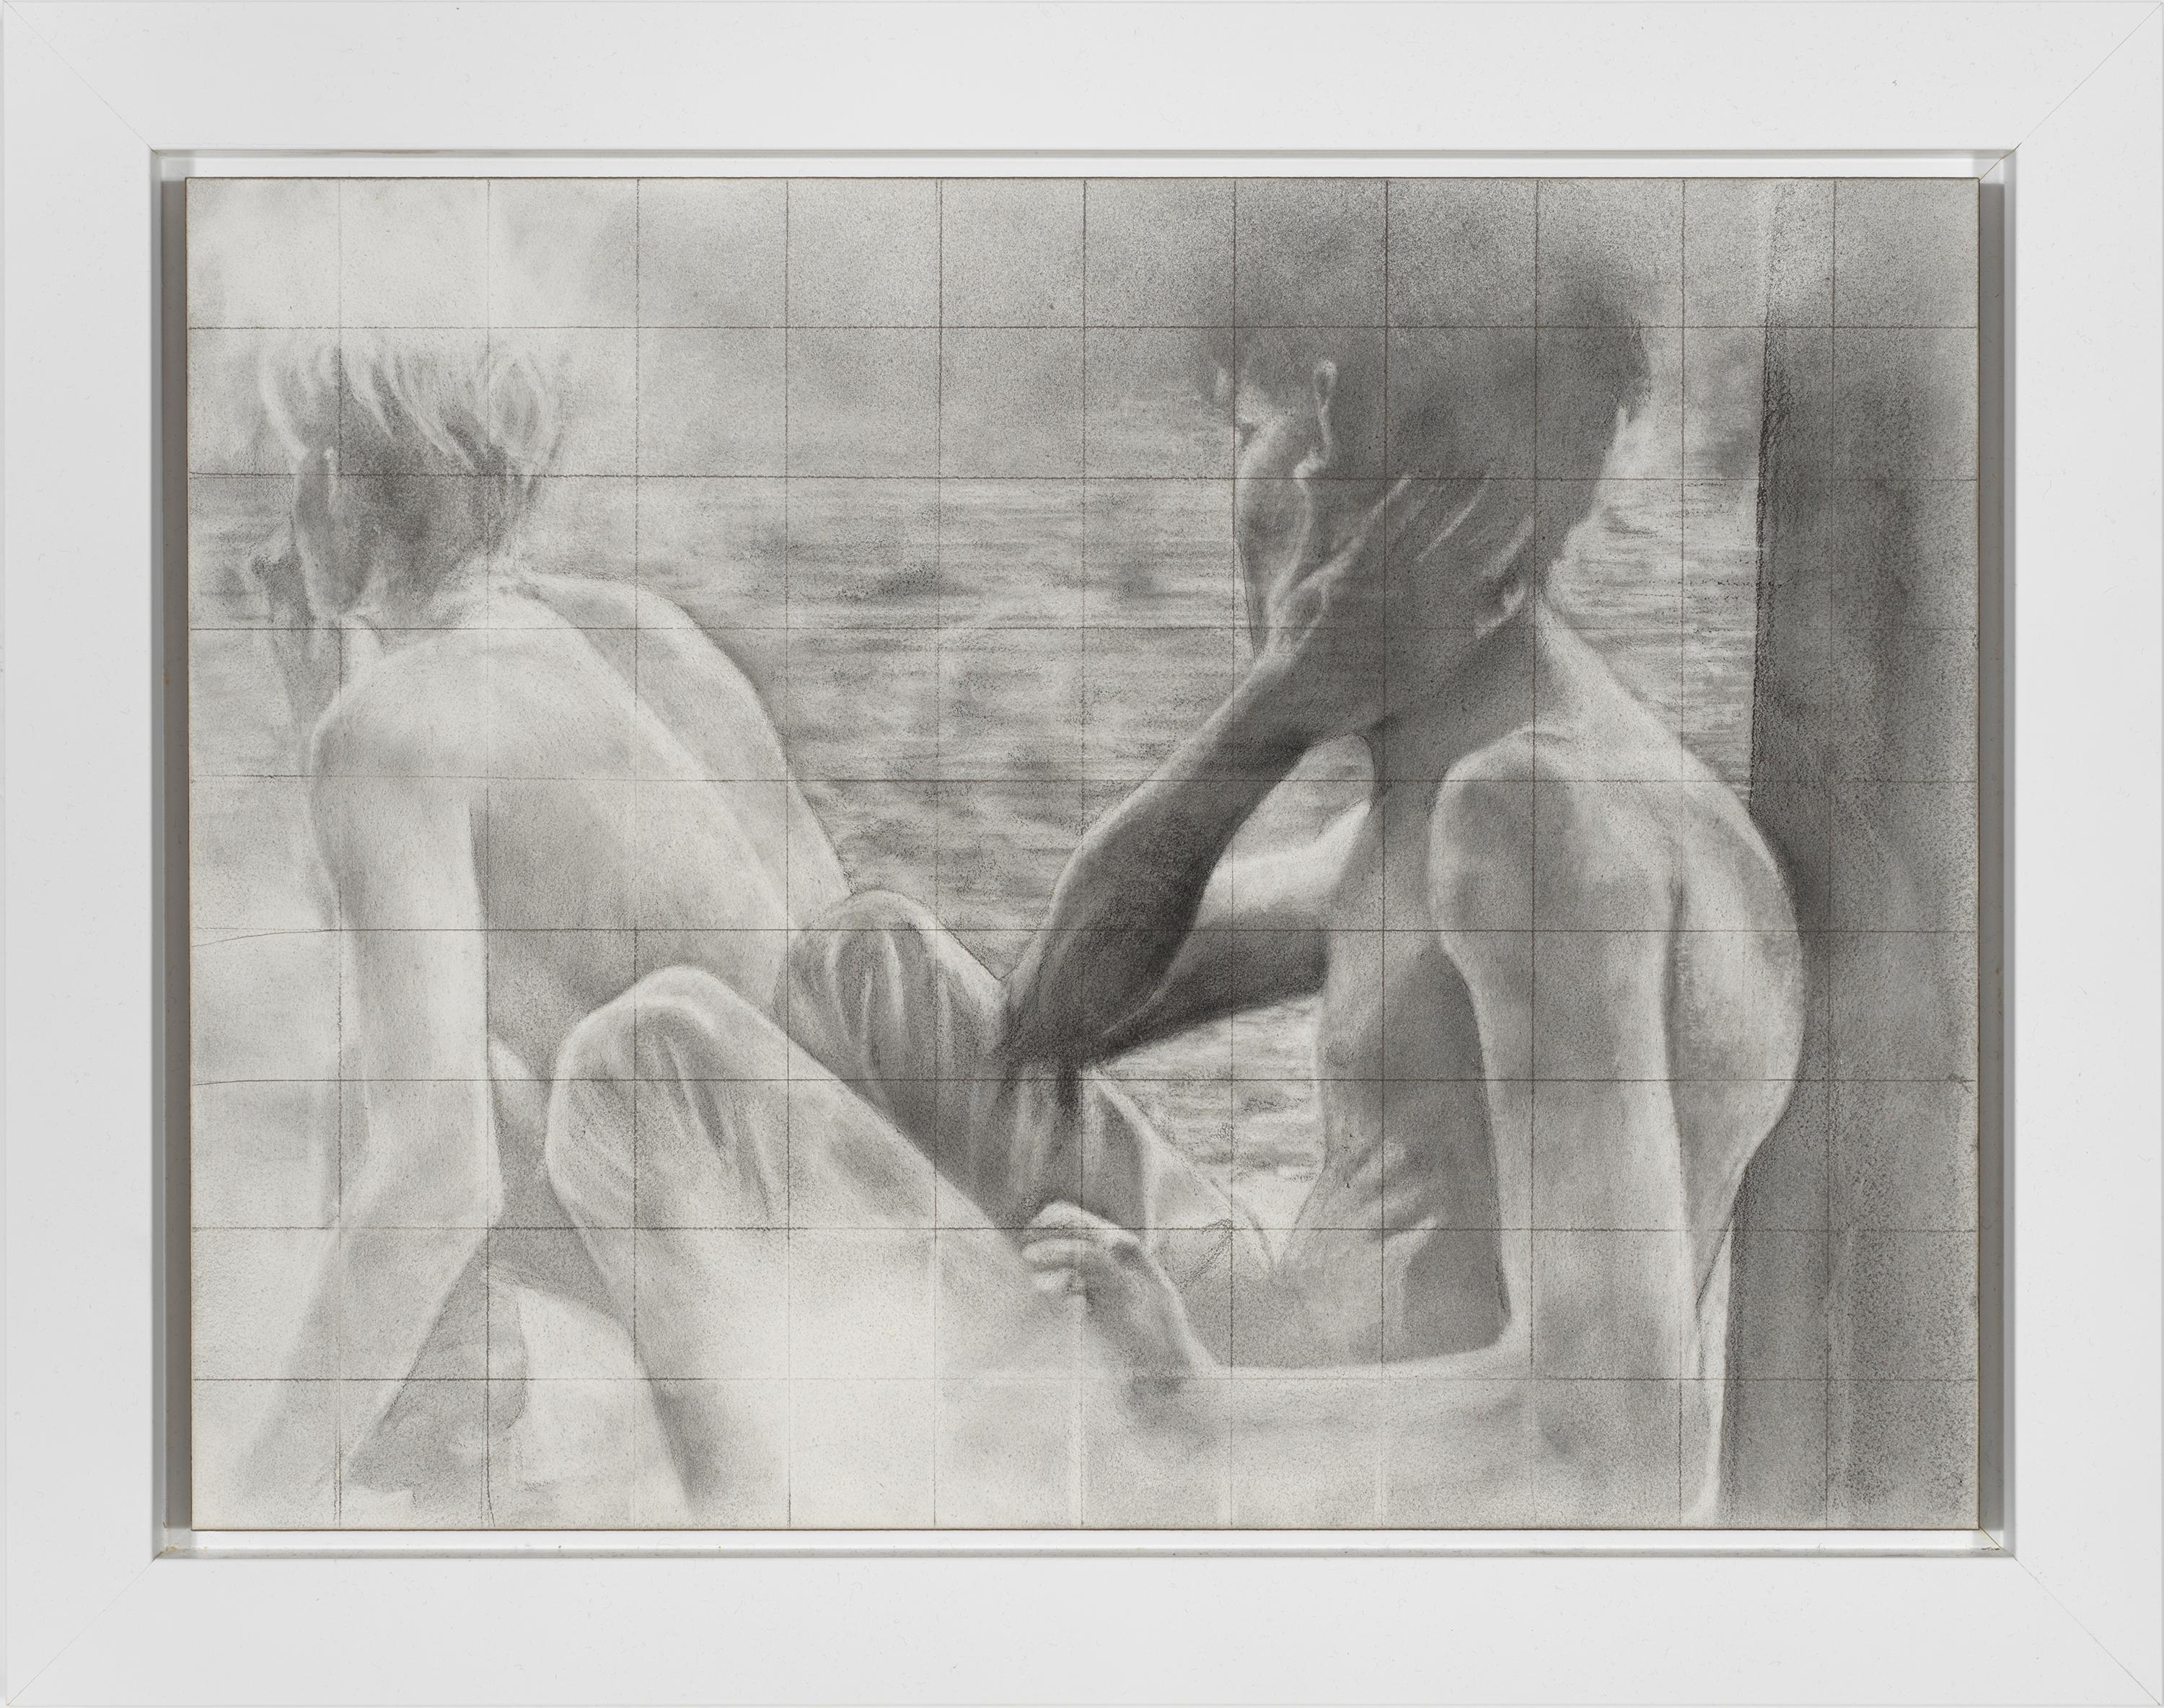 Untitled (Backs) - Vintage Polaroid Inspired Drawing of Two Boys at the Beach - Art by Rick Sindt